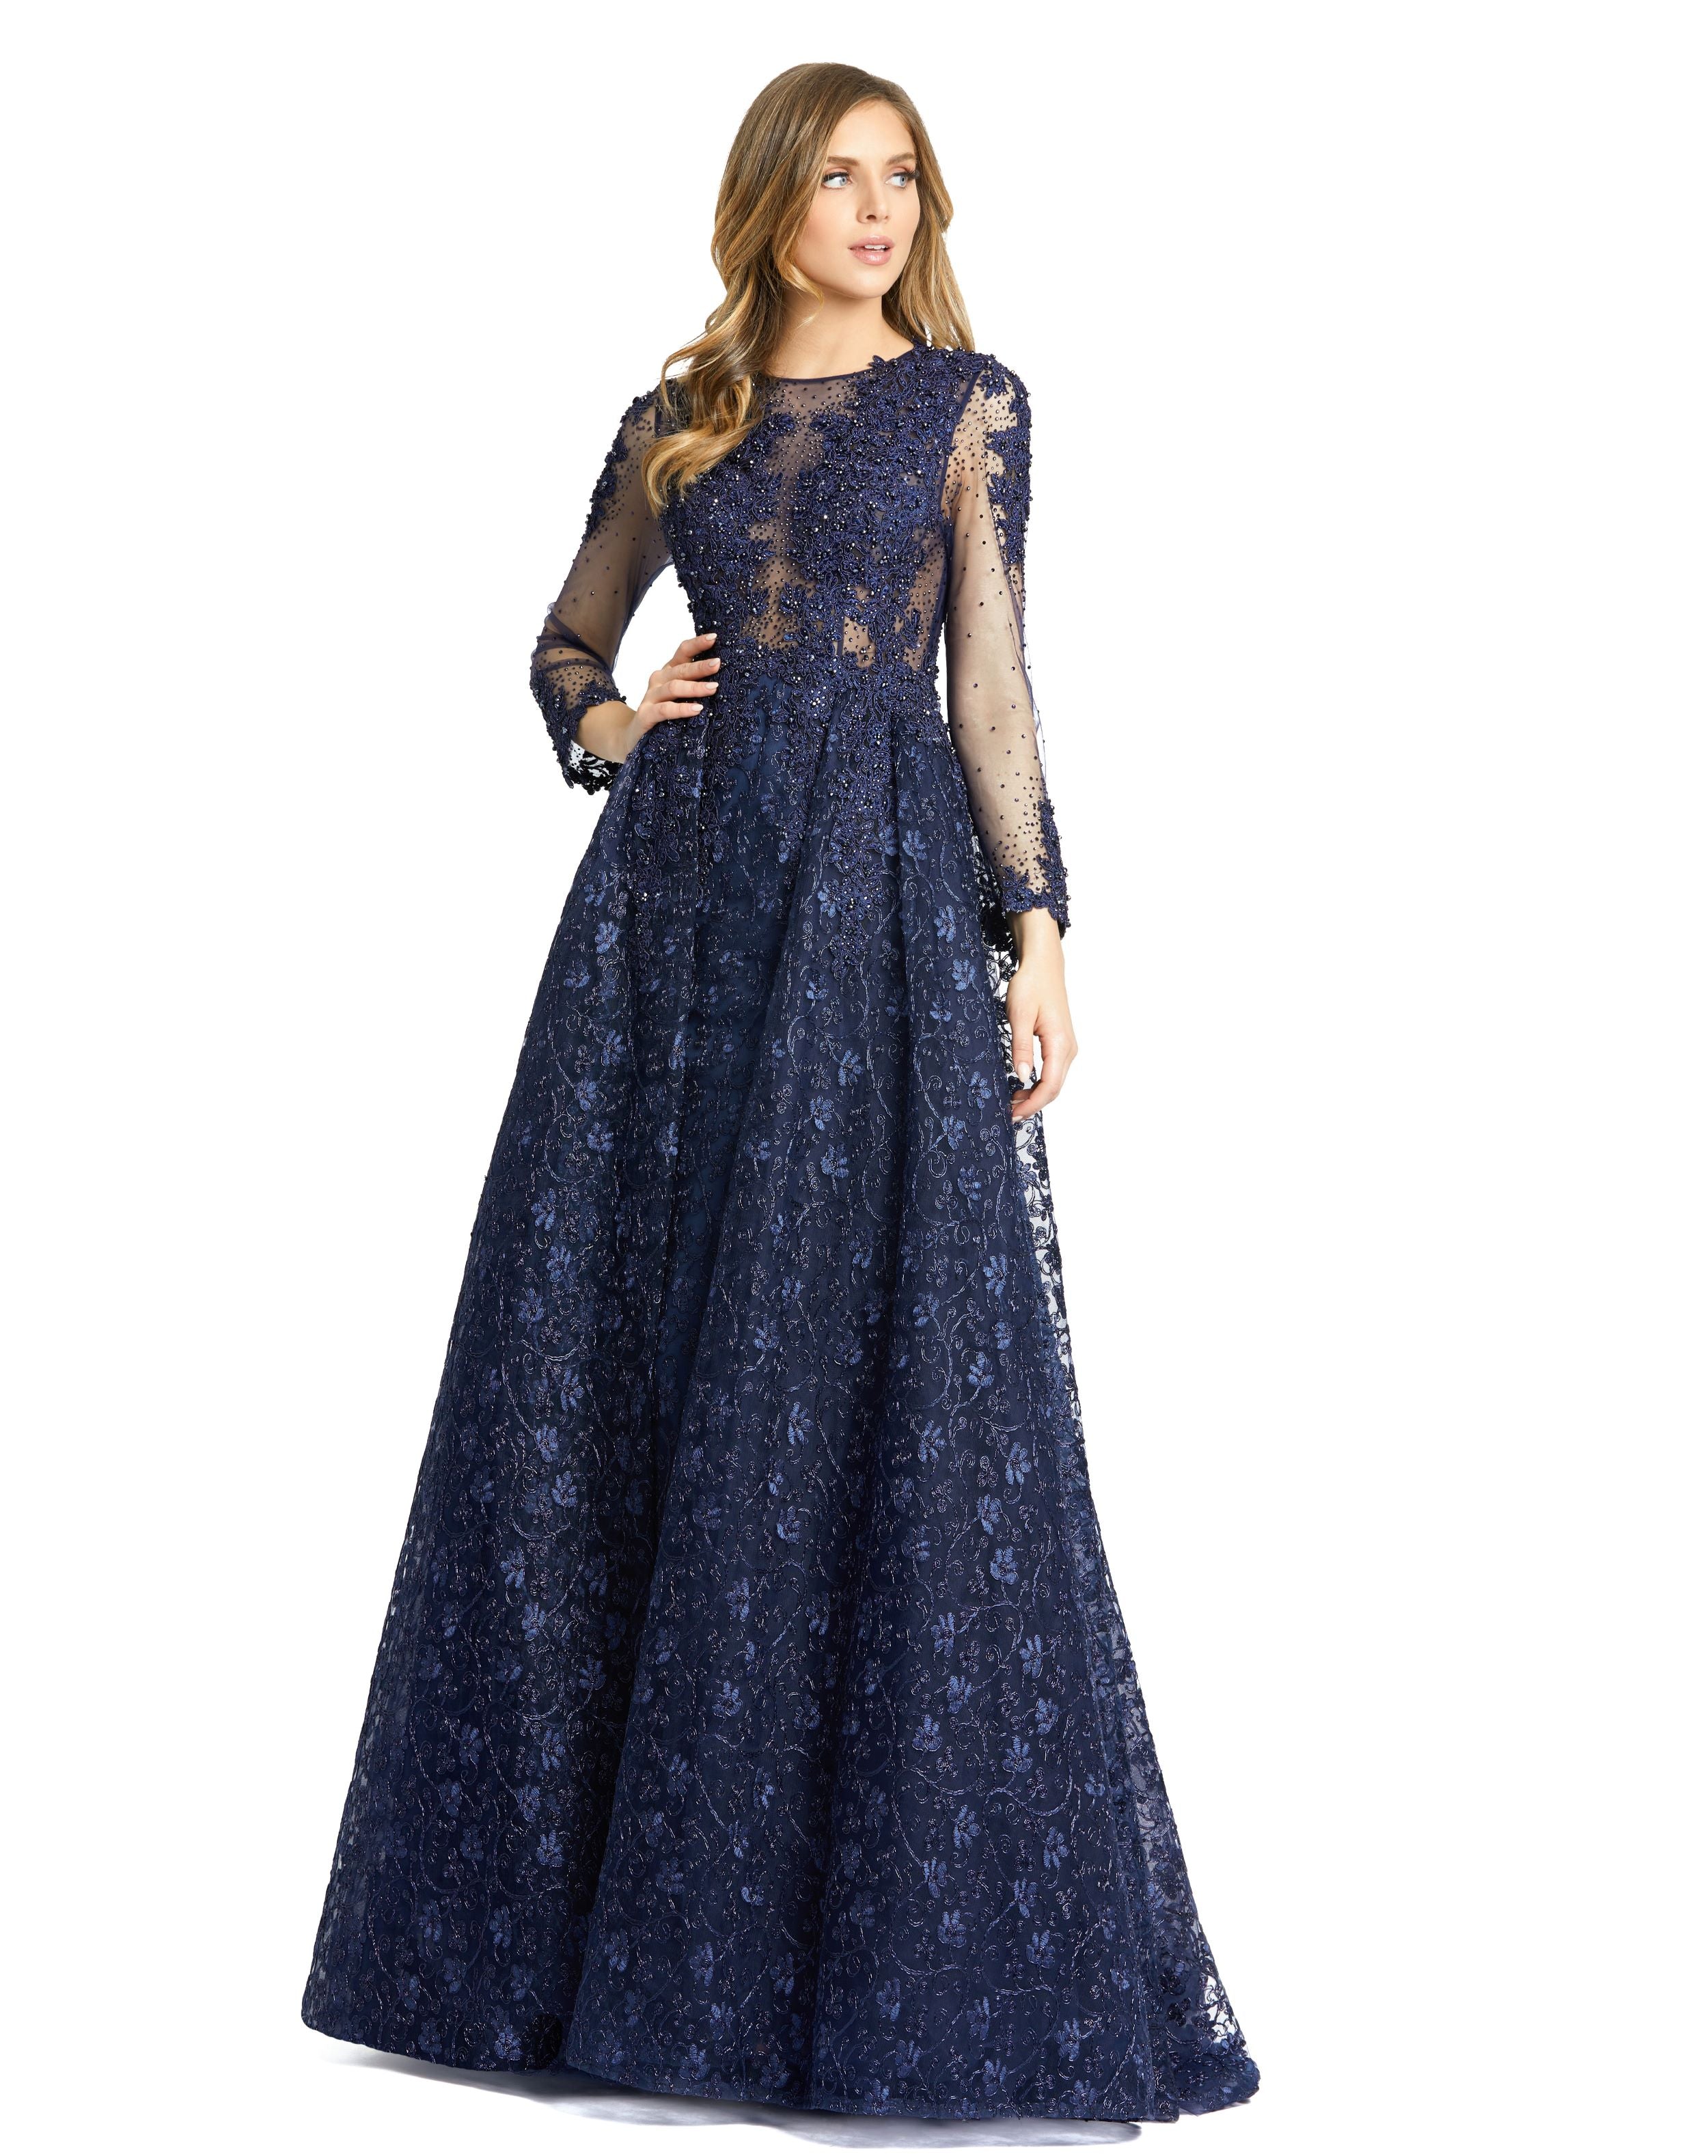 Embellished Illusion Long Sleeve A-Line Gown